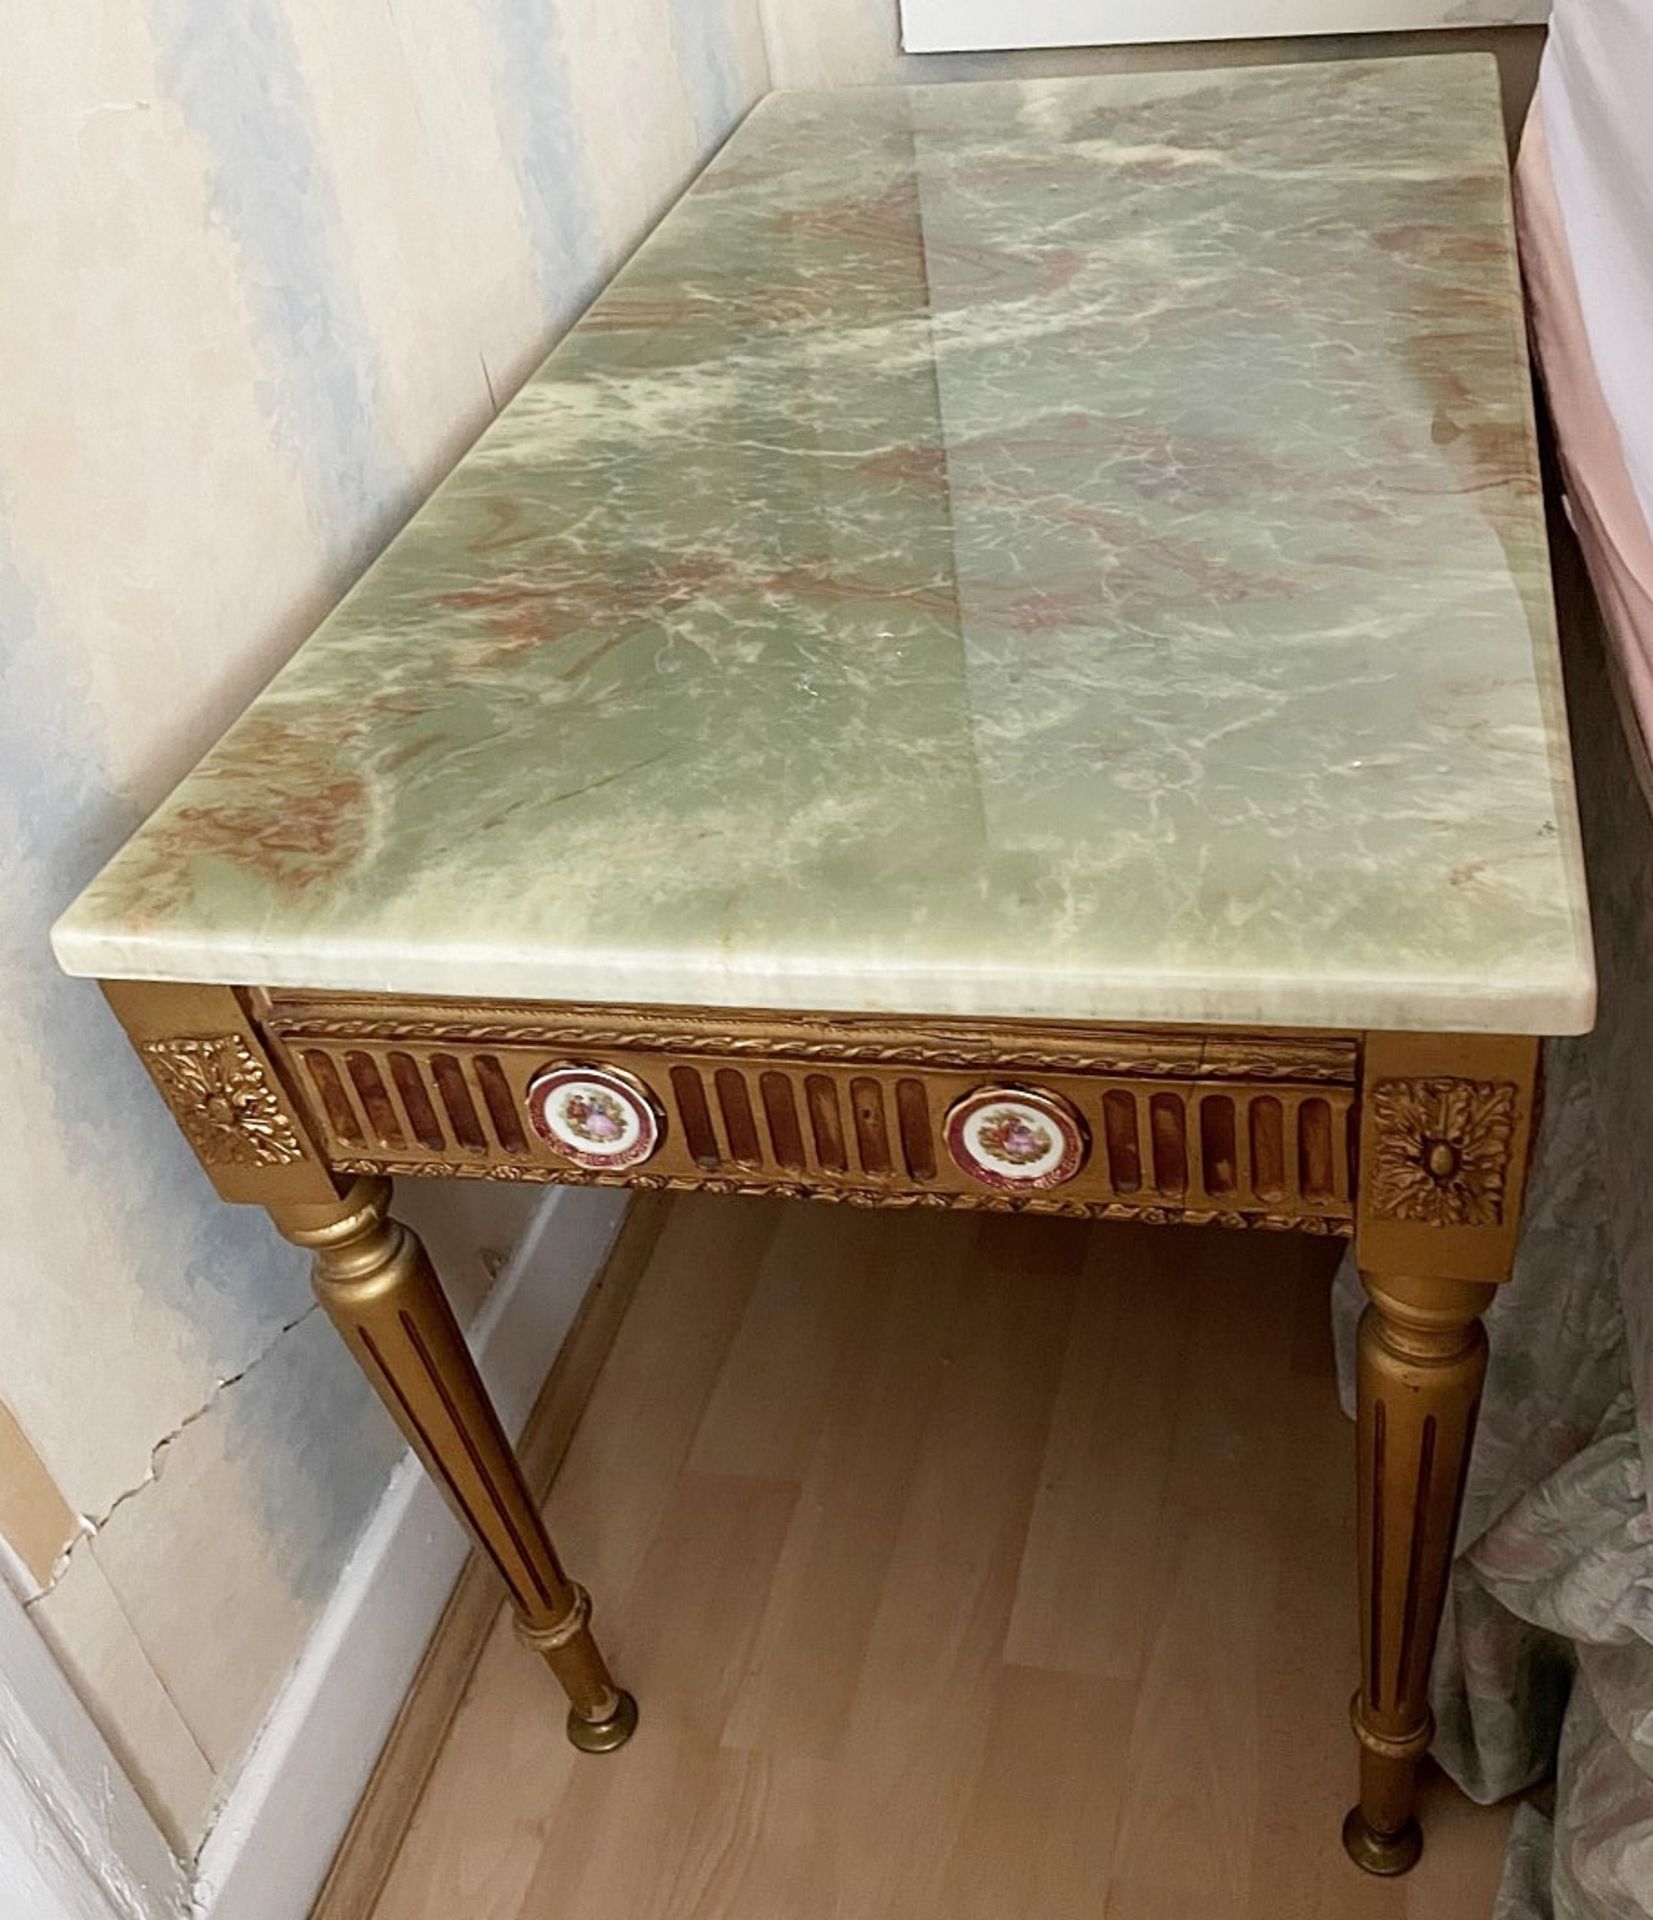 1 x Rectangular Period-style Marble Topped Table - From An Exclusive Property In Leeds - No VAT on - Image 5 of 5